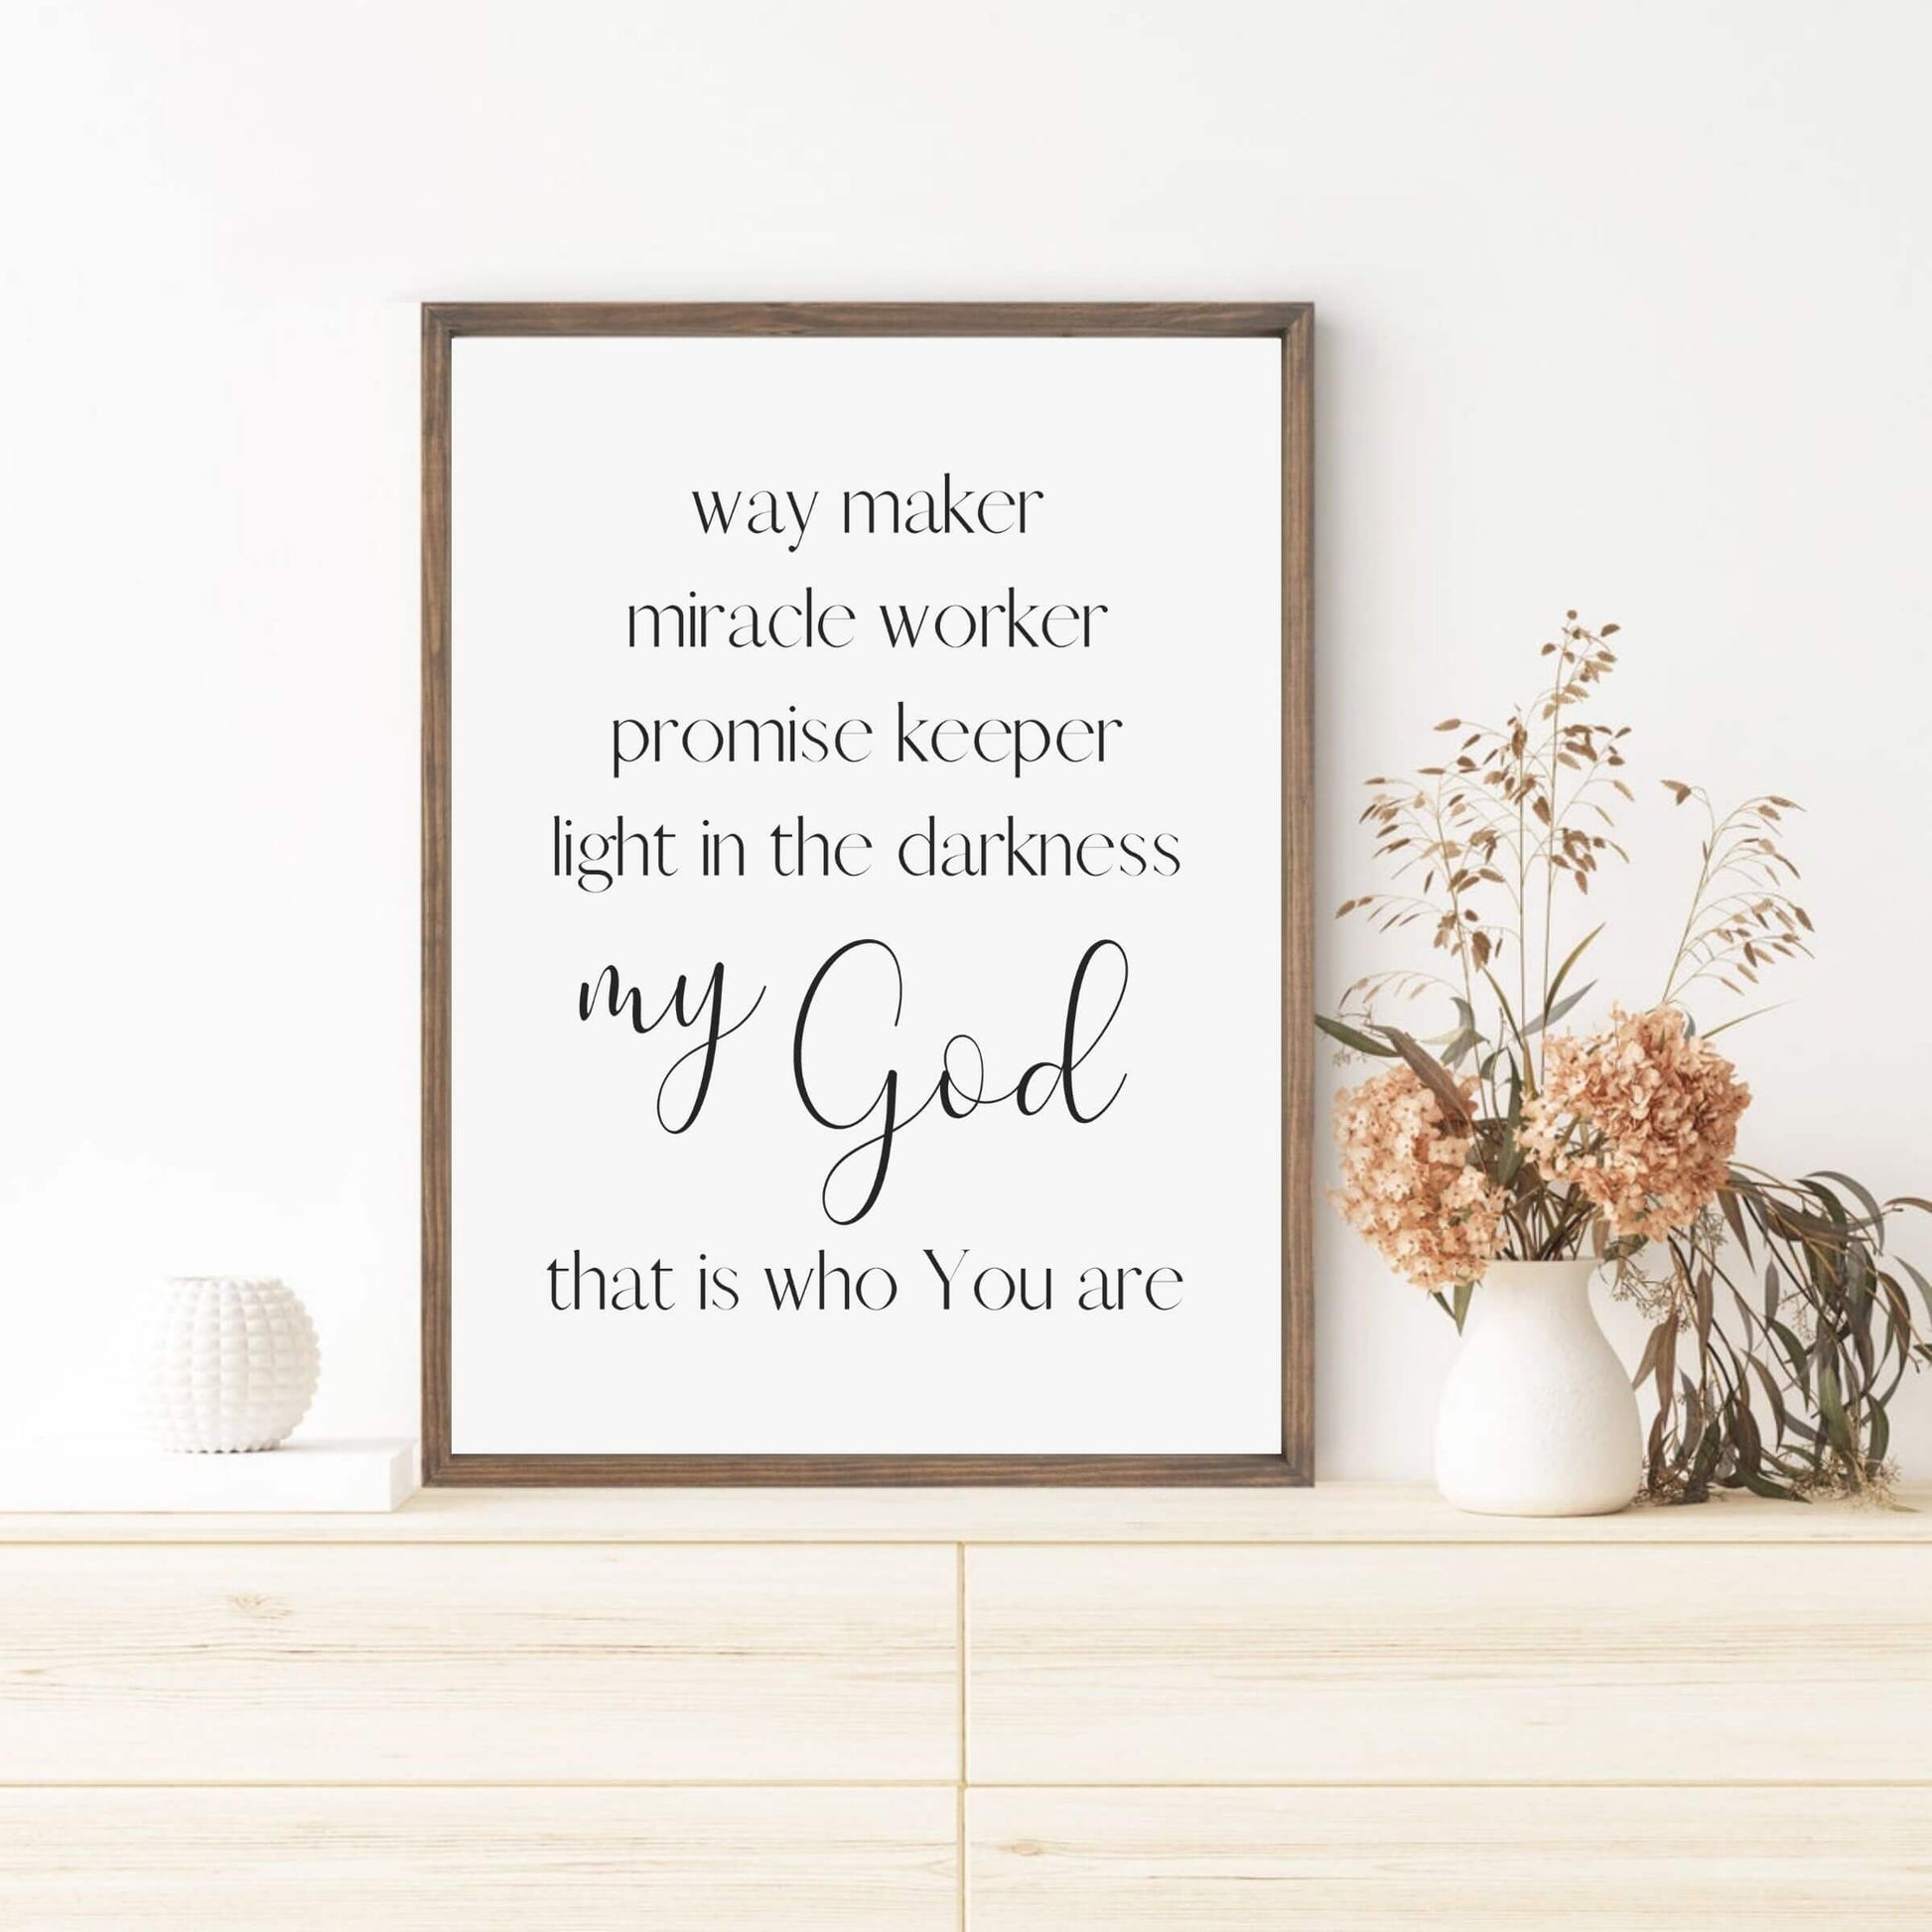 Way Maker Lyrics Sign, Christian Decor, Wooden Sign, Jesus Sign, Miracle Worker, Promise Keeper, My God